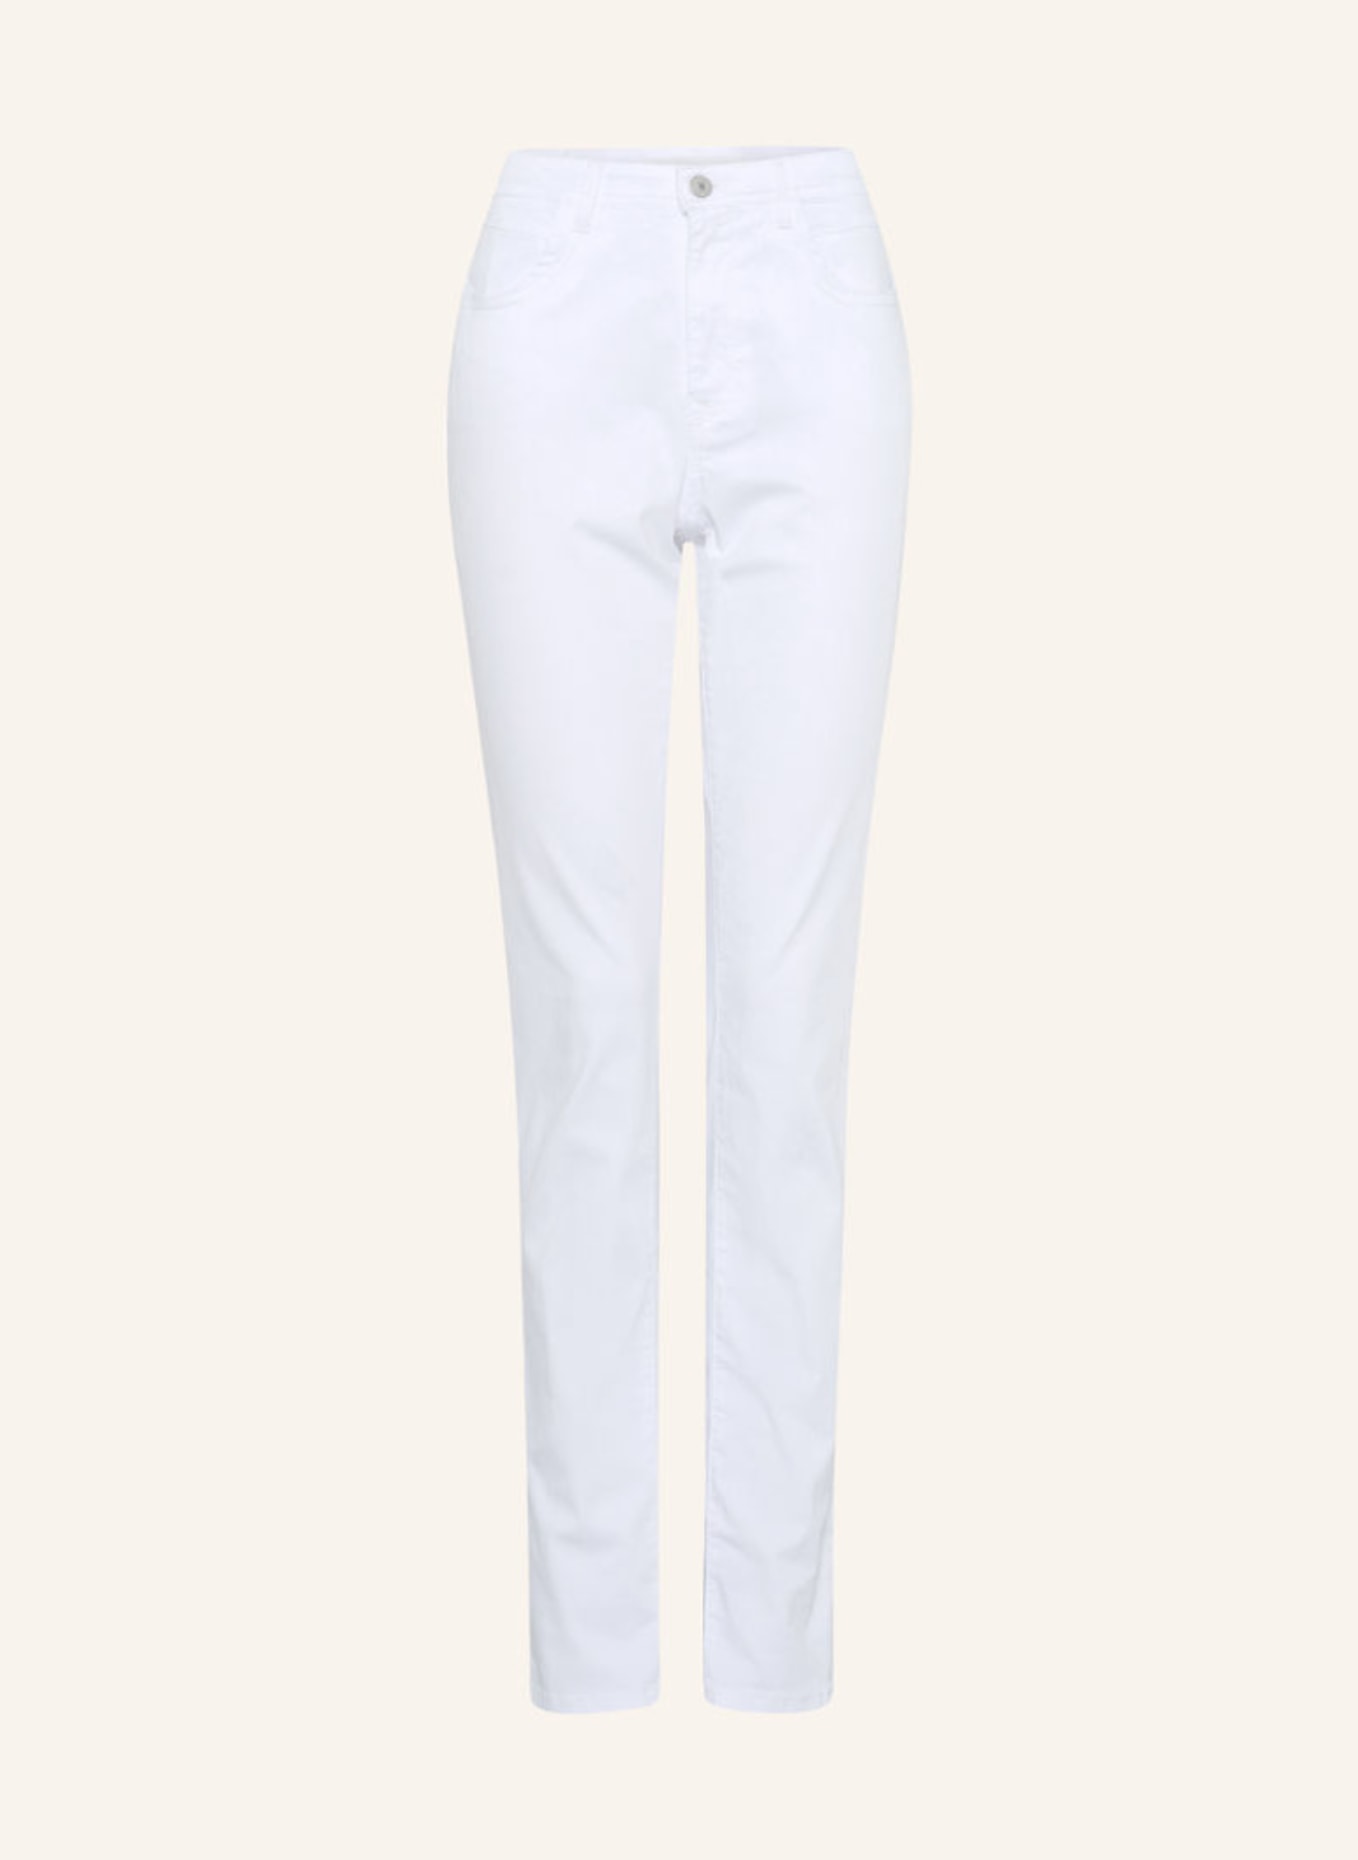 BRAX Jeans STYLE MARY, Farbe: WEISS (Bild 1)